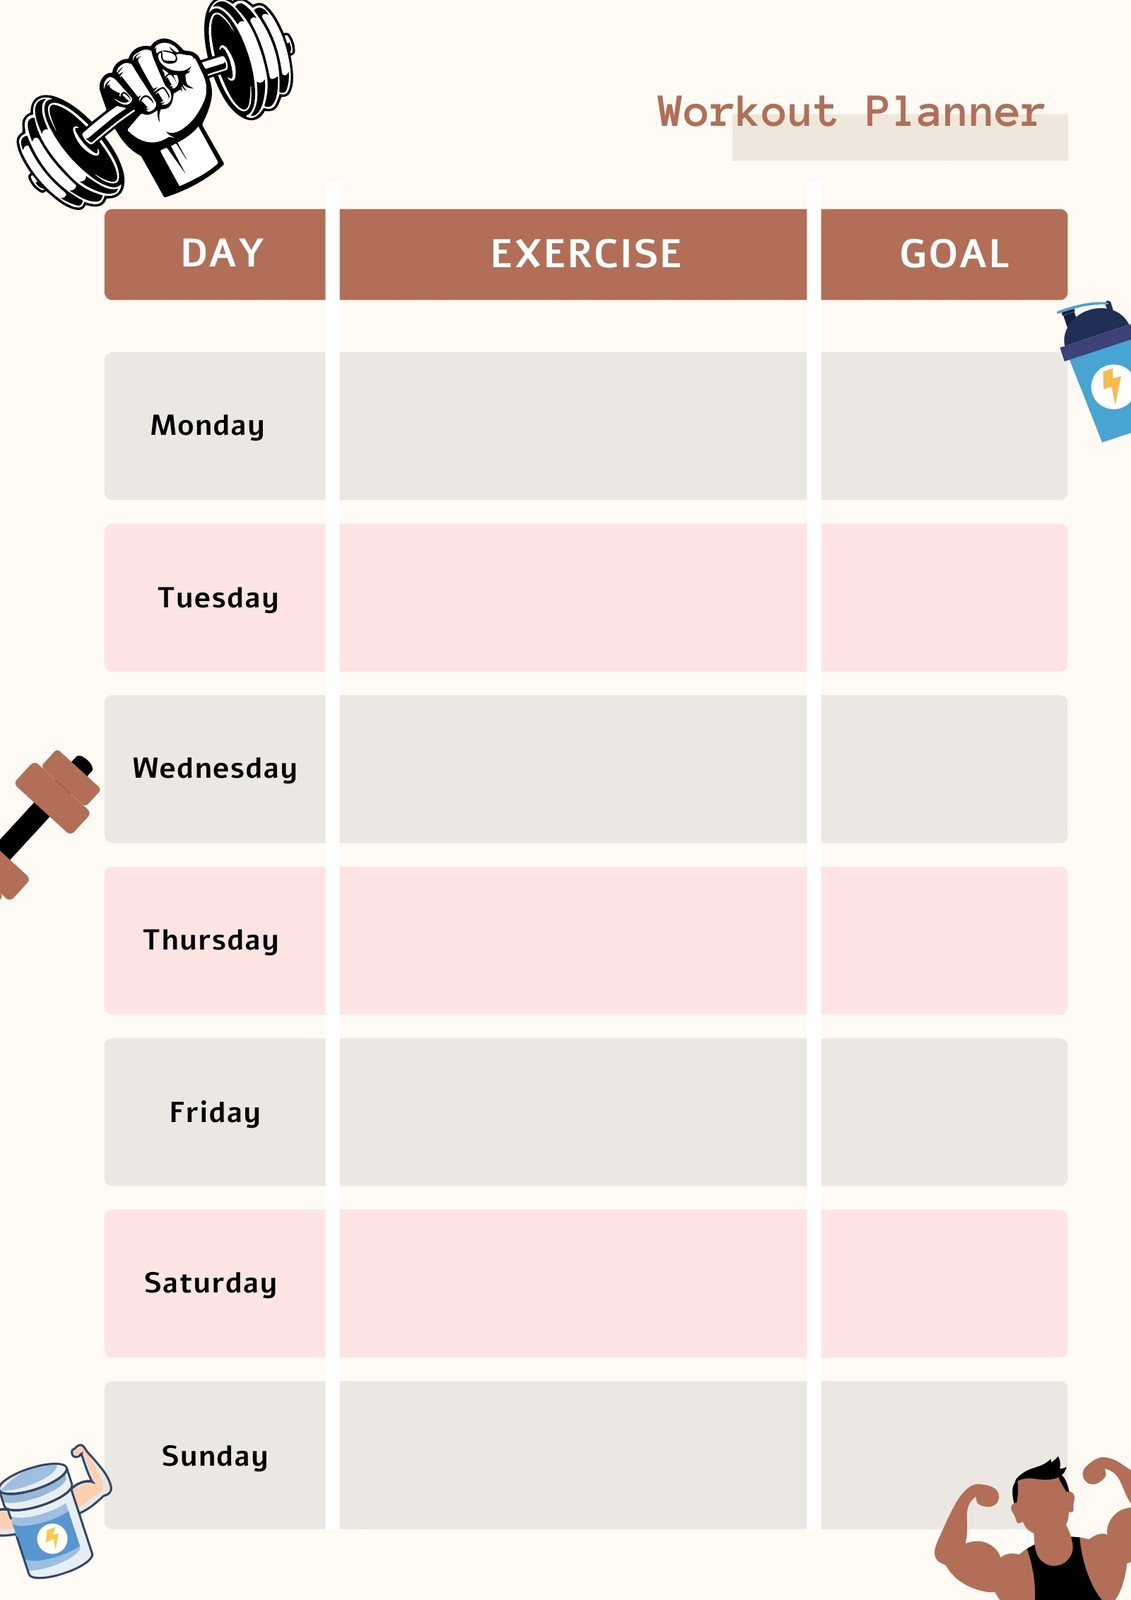 Free, custom printable workout planner templates online